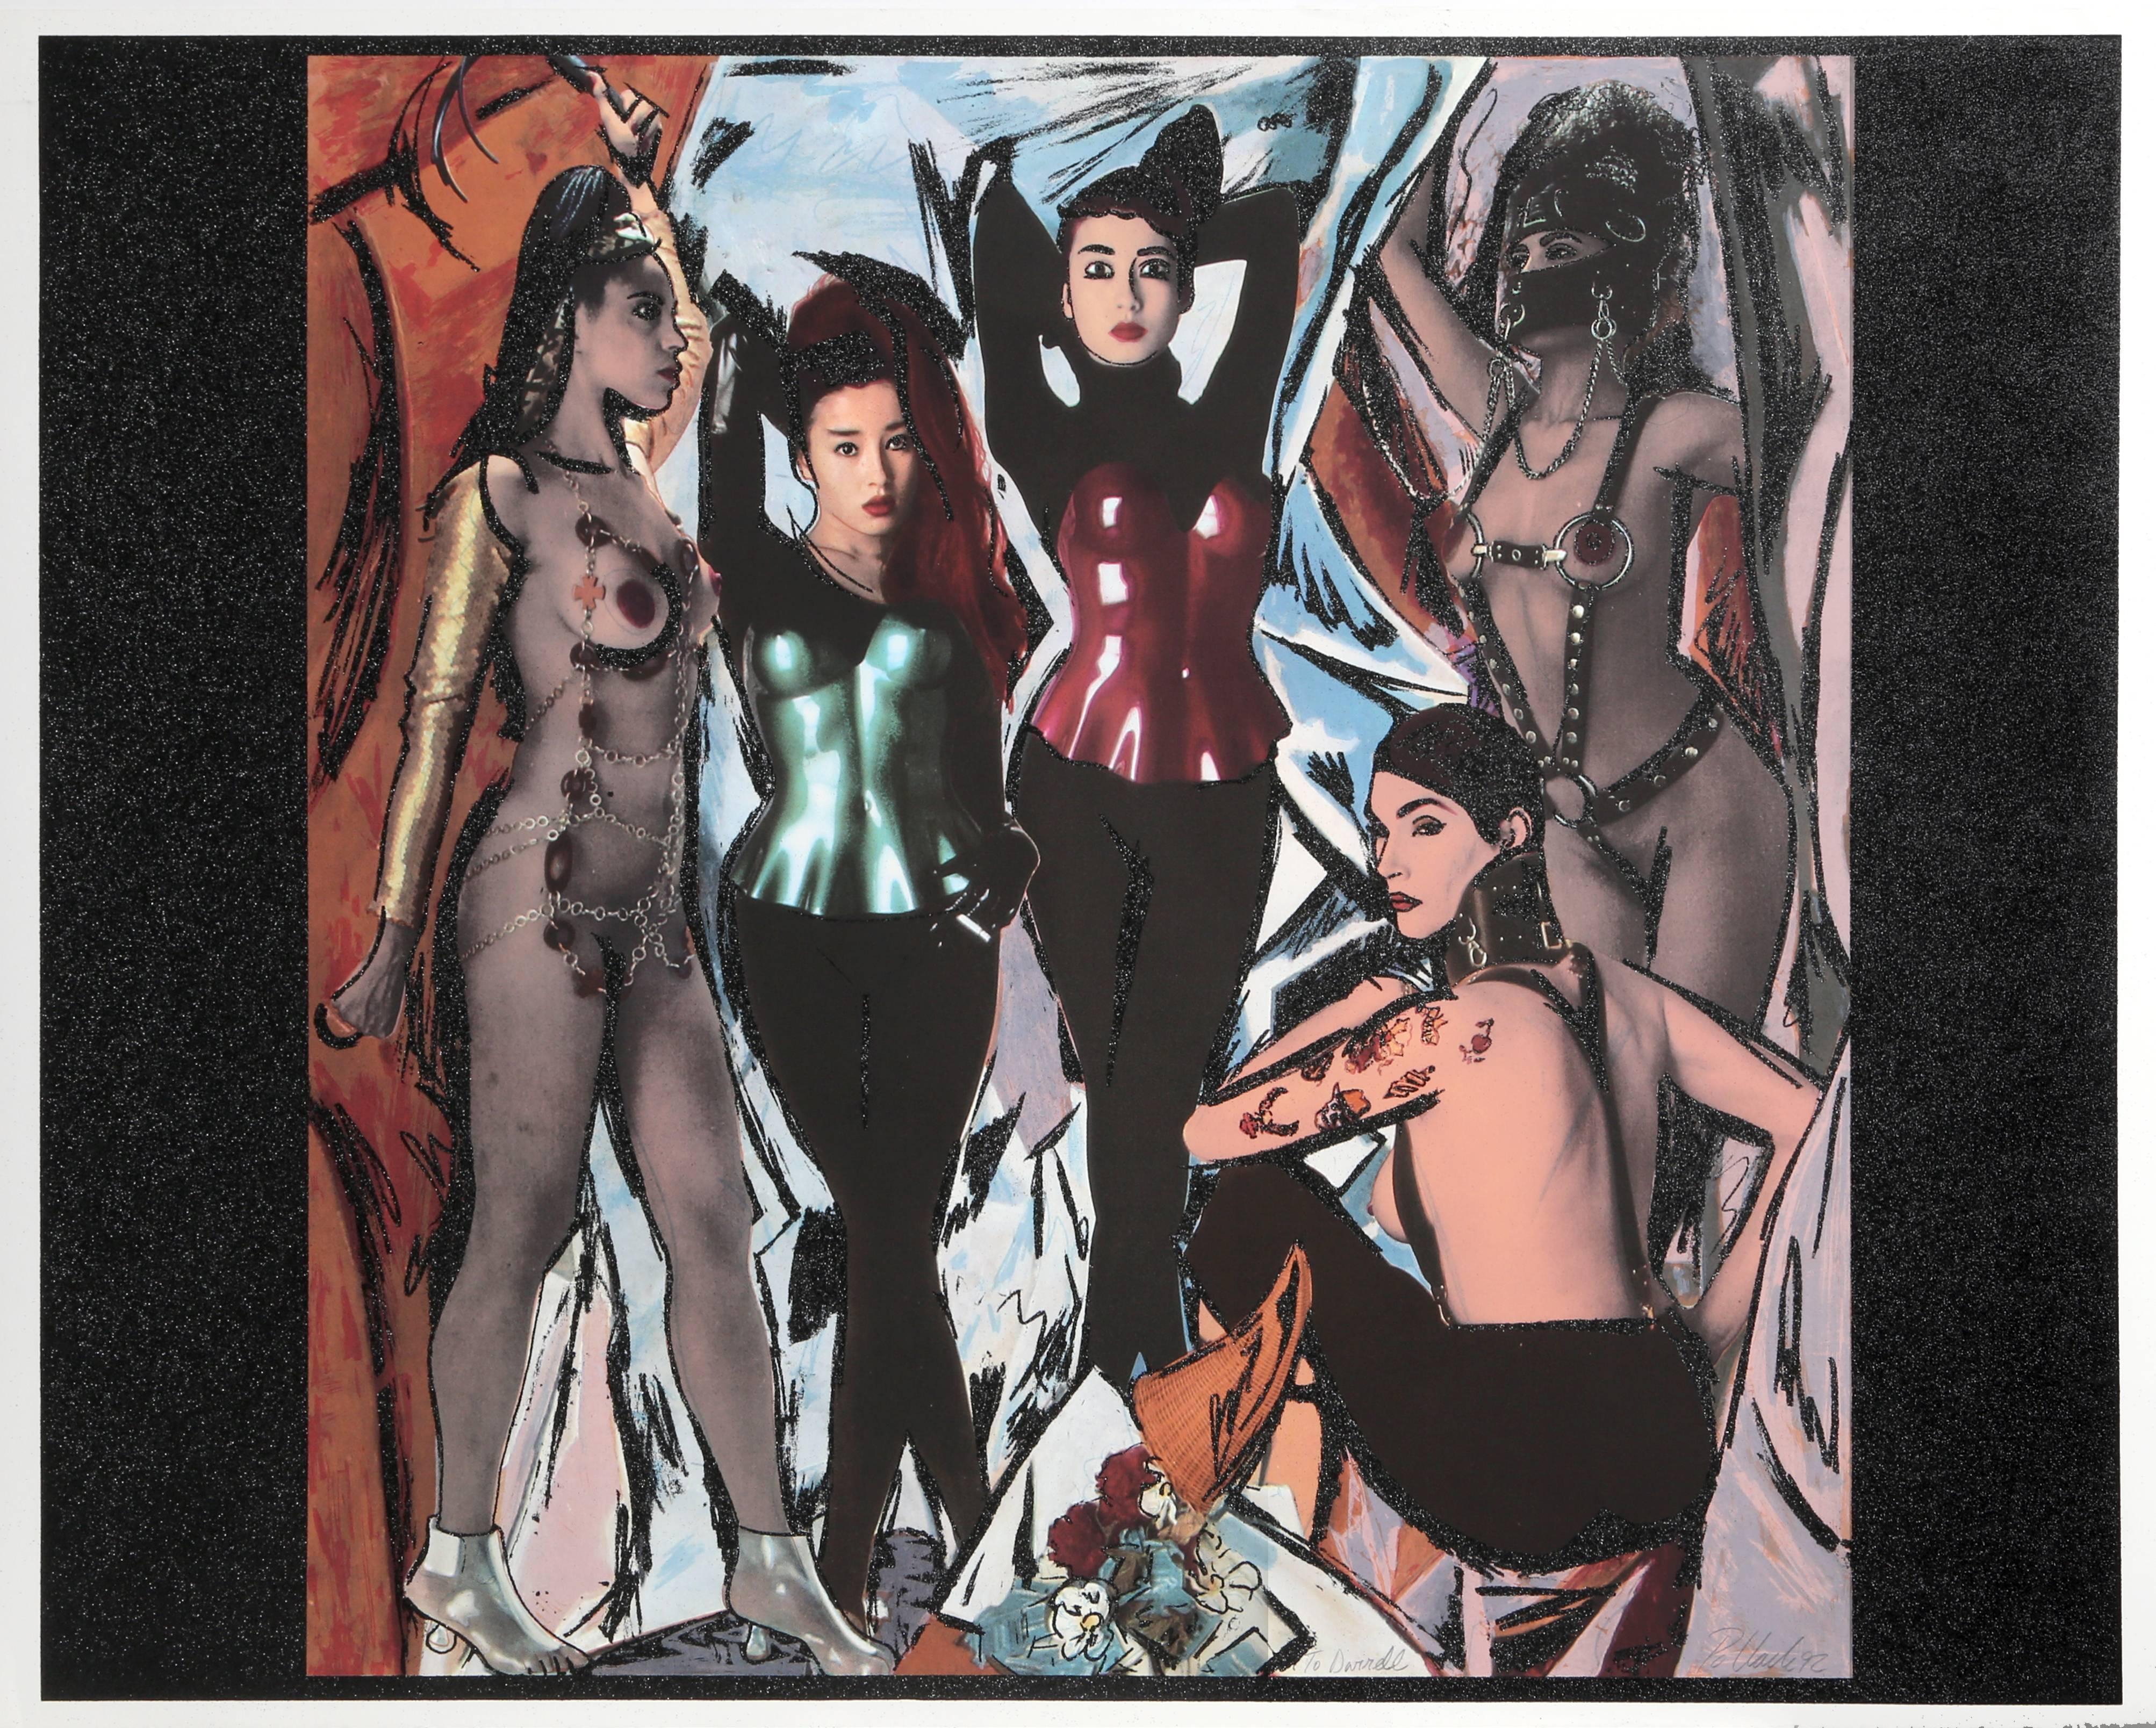 Rie Miyazawa Les Demoiselles d'Avignon (after Picasso), by Steven Pollac